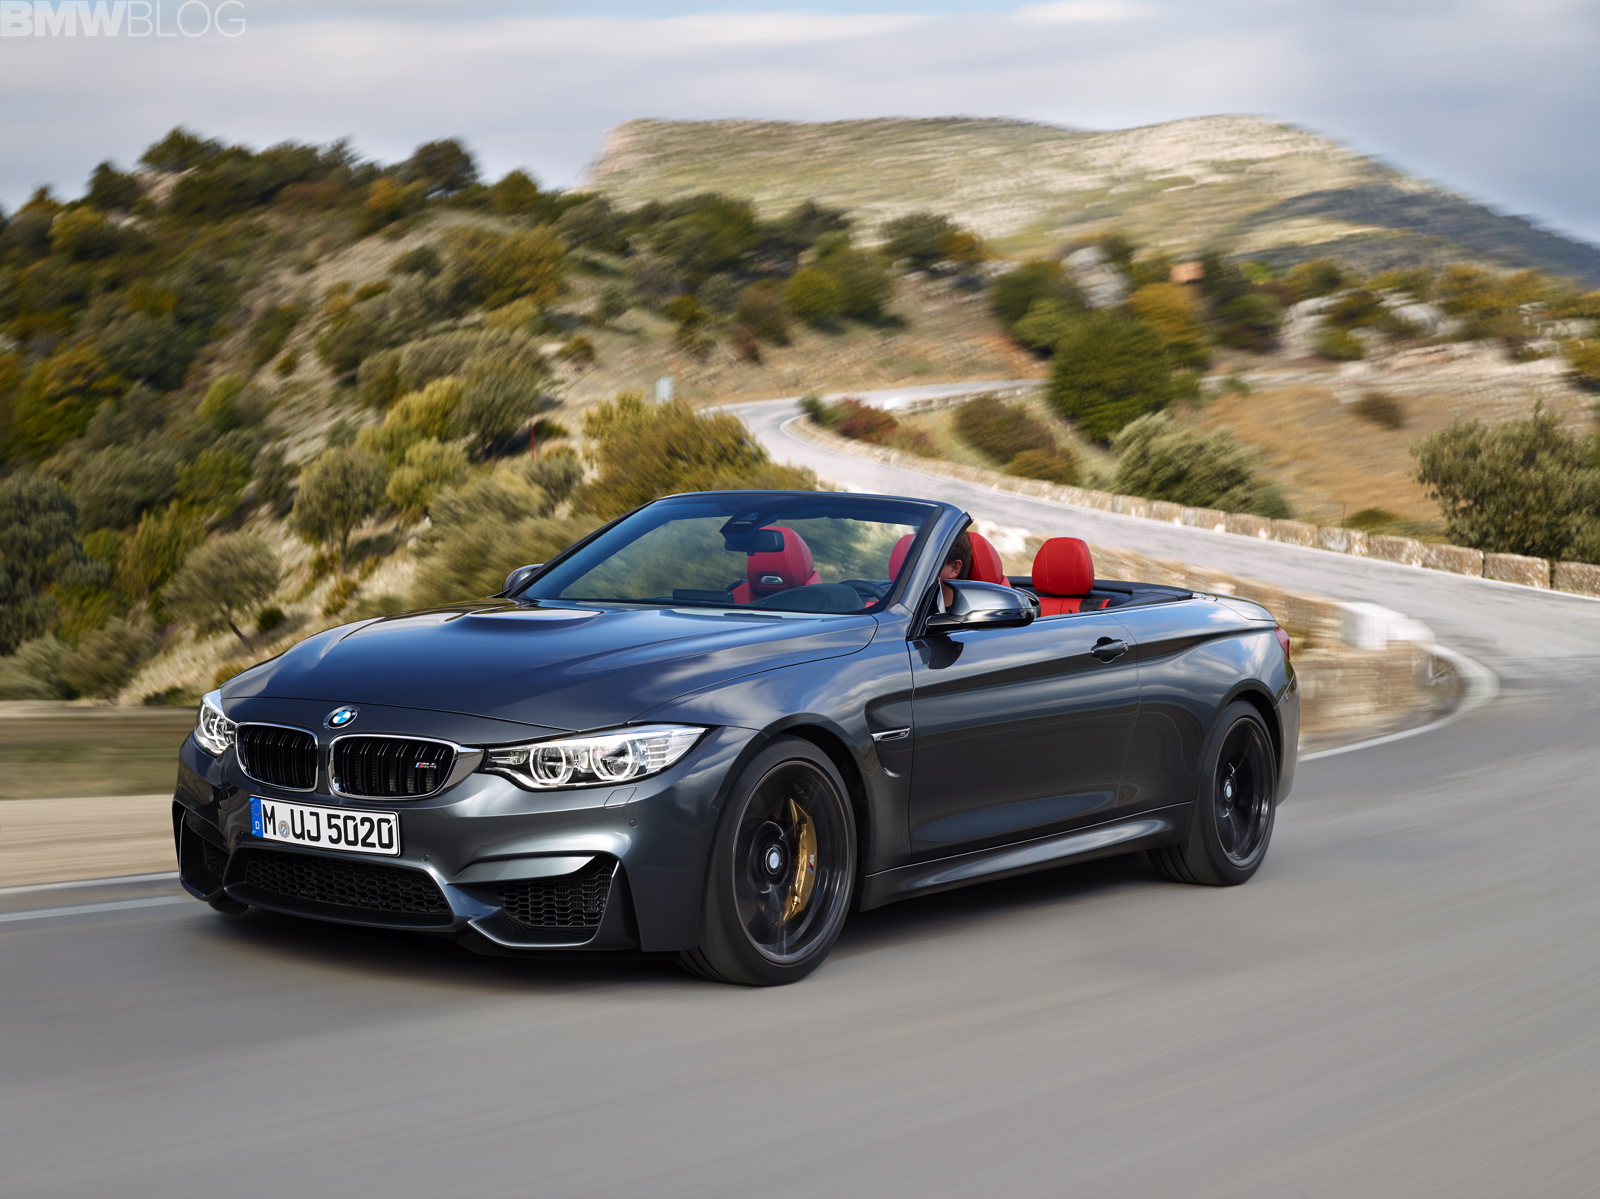 2015 Bmw M4 Convertible Top Up